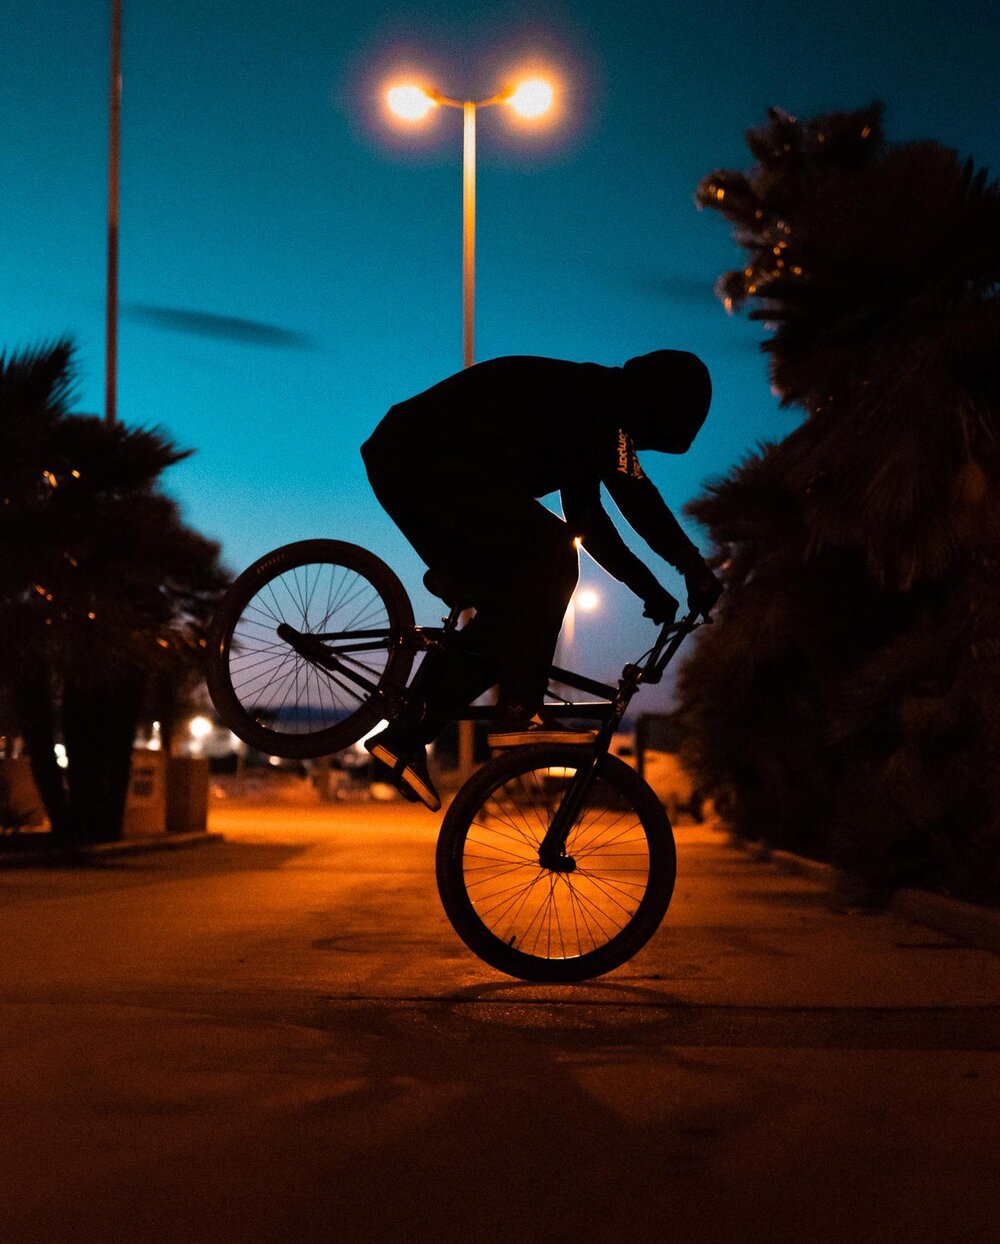 How cool those shots are ? Improvised pics took my talented gf. I&rsquo;m just doing basic tricks but i look like a pro 😎
-
Still dedicating 1h/1h30 to bmx rides during the week, while continuing resistance/weighted training. This is a good way to h